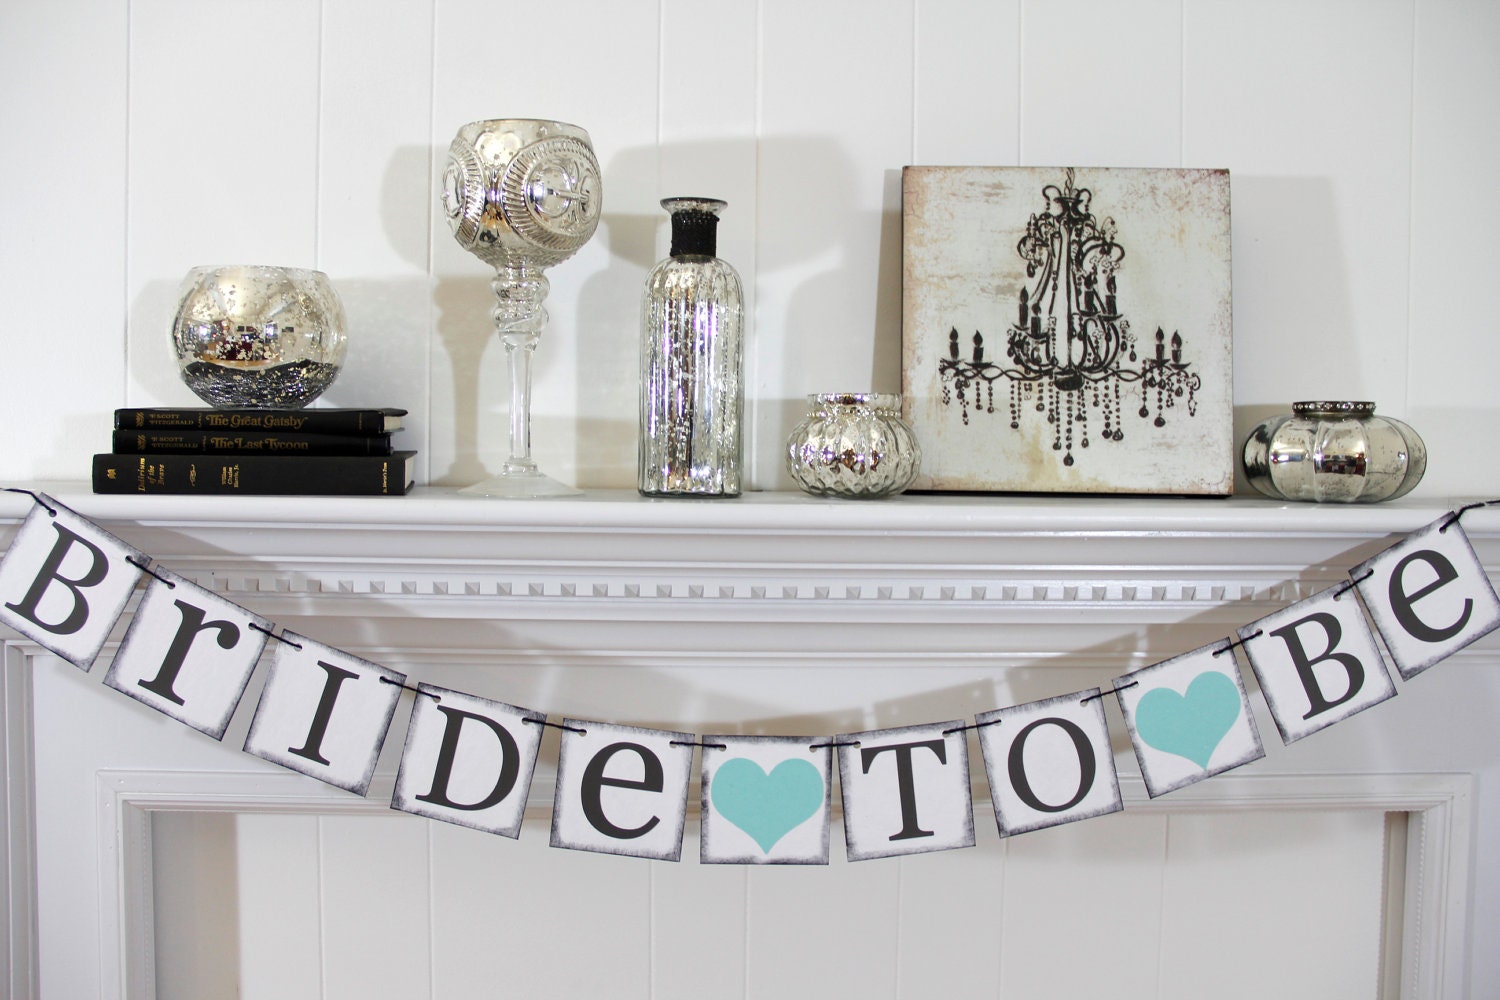 bride-to-be-banner-bridal-shower-decorations-bridal-shower-banners-bachelorette-party